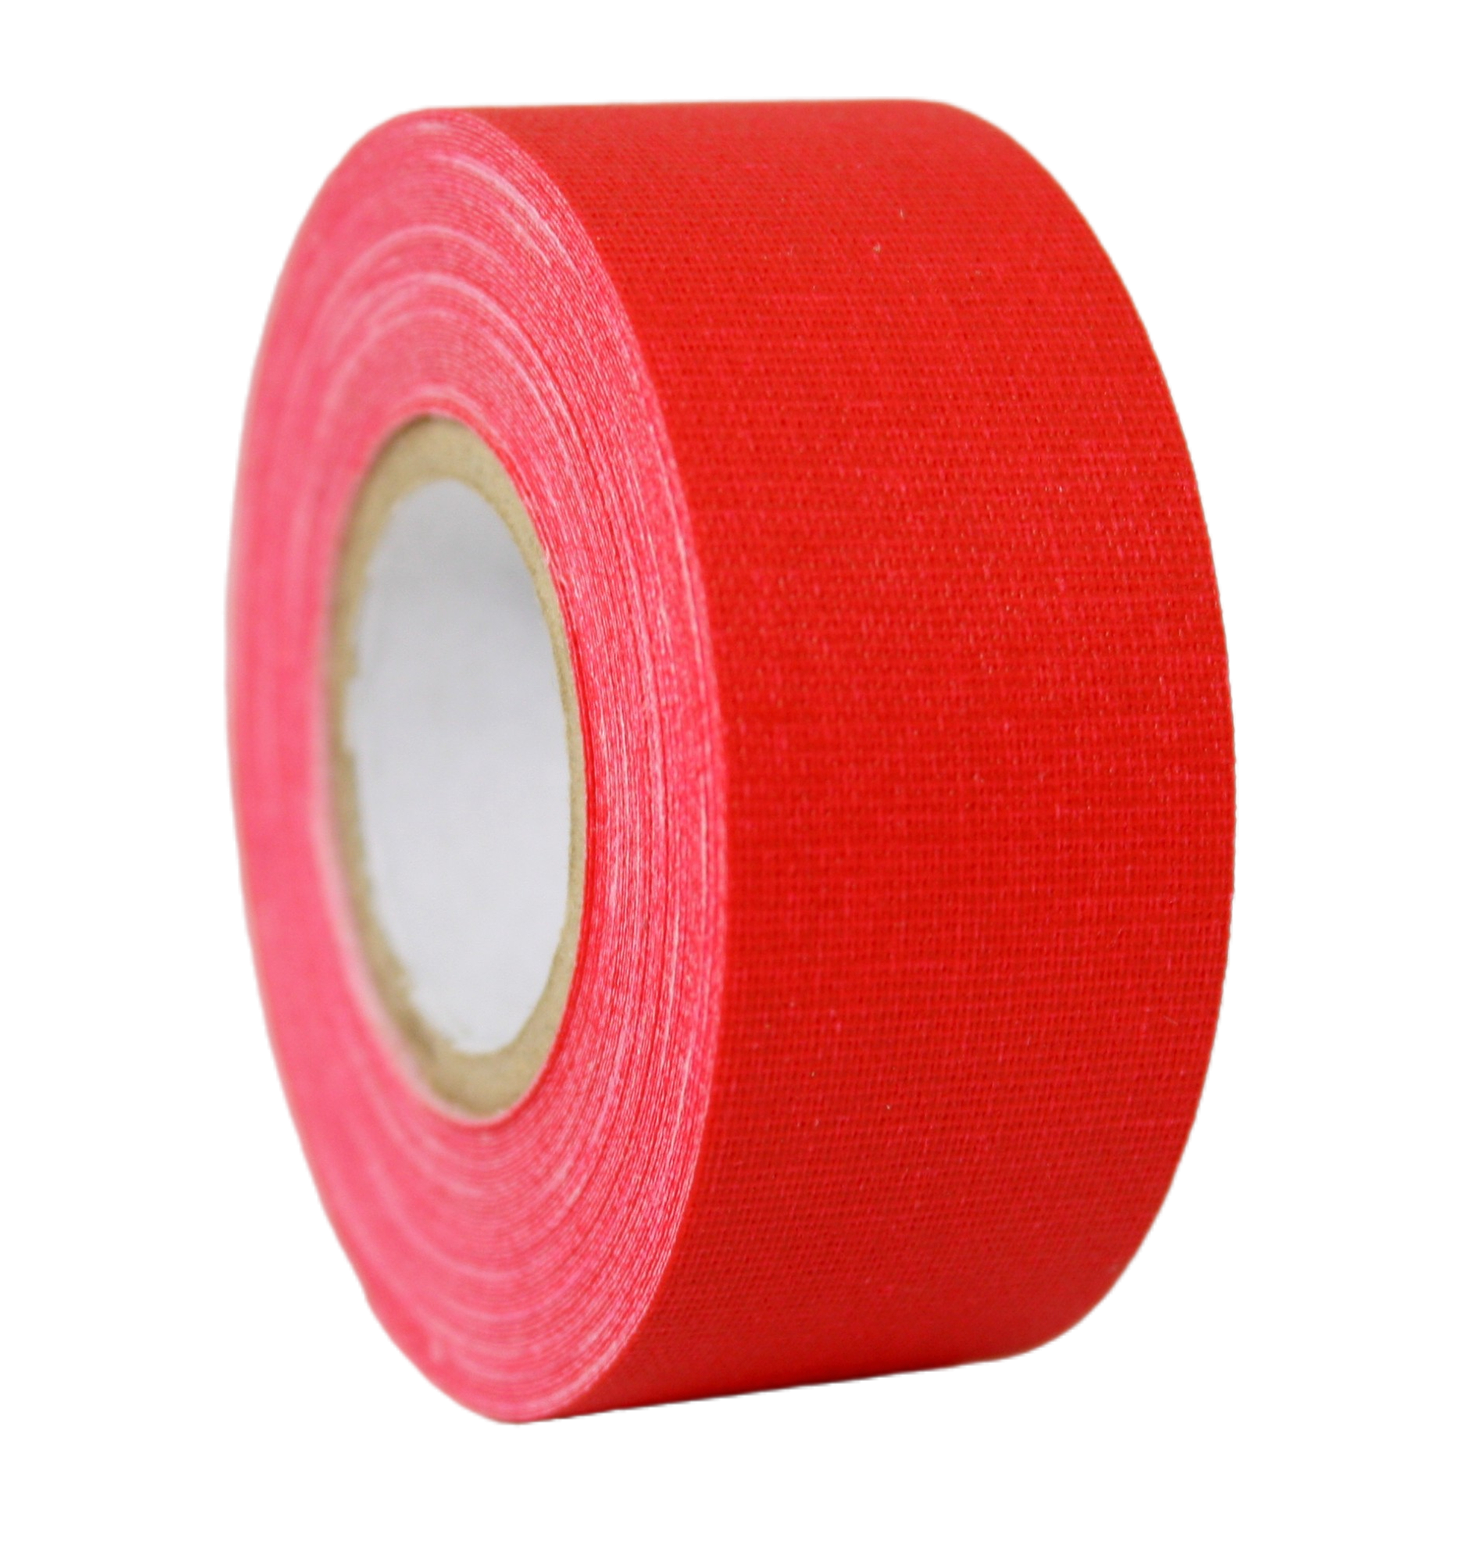 A close up of a single roll of red Micro Gaffer 1" tape